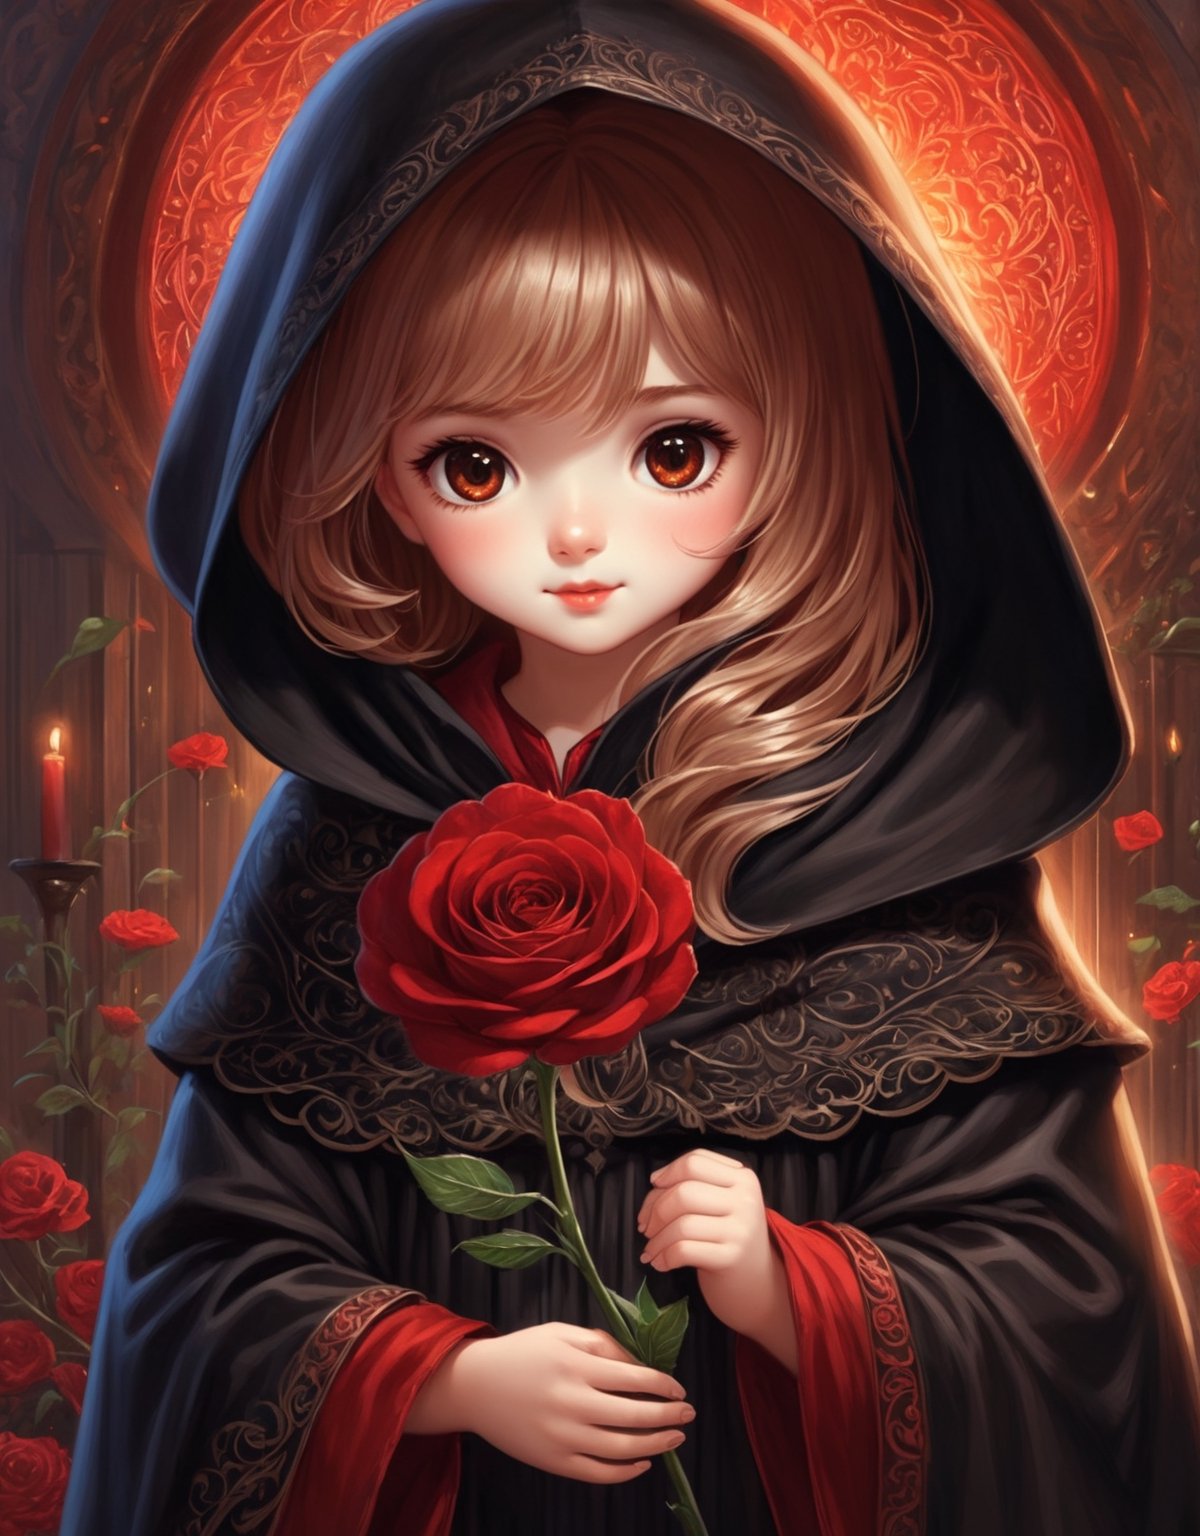 Cute, tall good spirit of the reaper, black cloak, holding out a beautiful lush red rose, a little cute girl of five years old, warm atmosphere, kindness, filigree drawing of small details, high detail